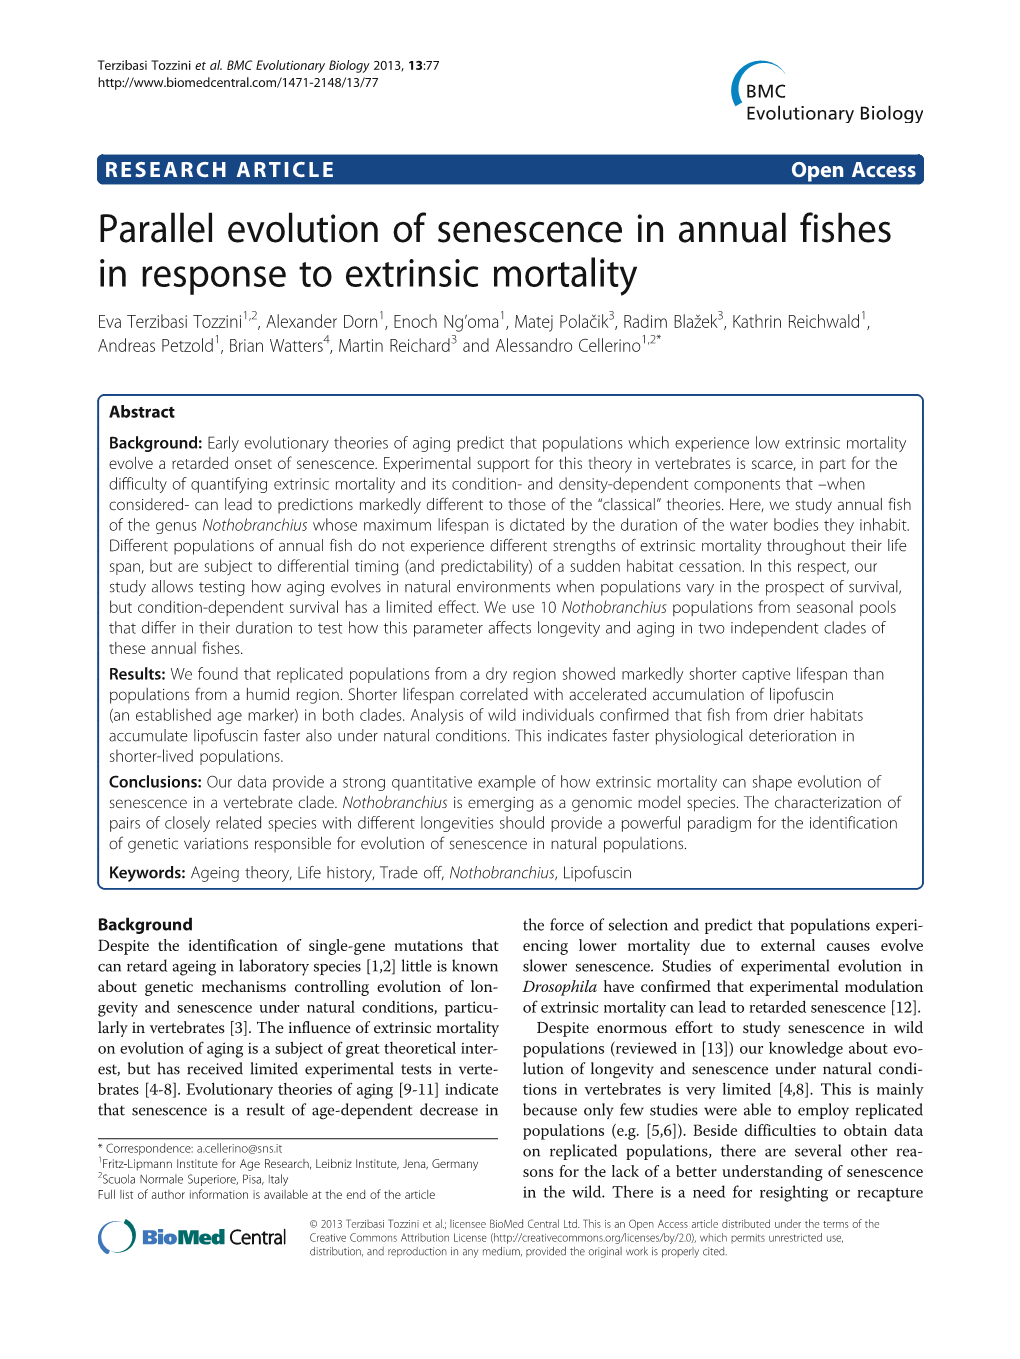 Parallel Evolution of Senescence in Annual Fishes in Response to Extrinsic Mortality